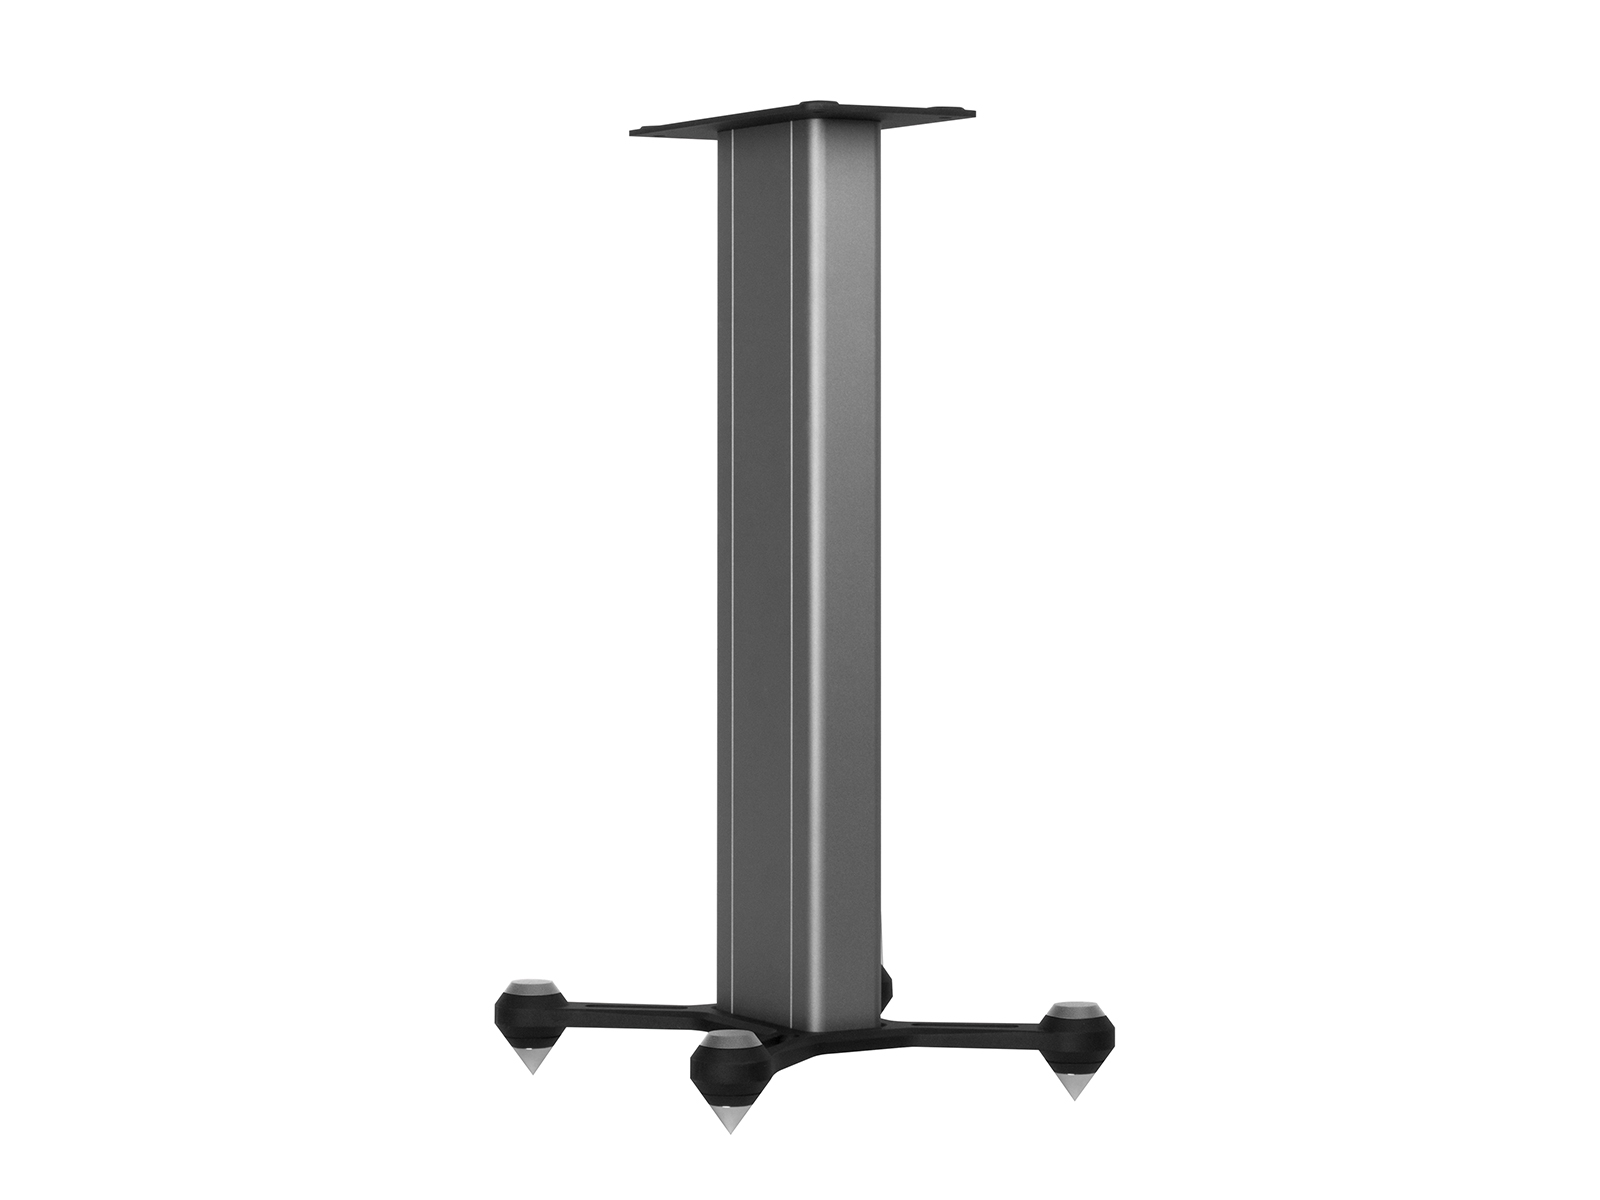 Speaker STAND, front view in a black finish.